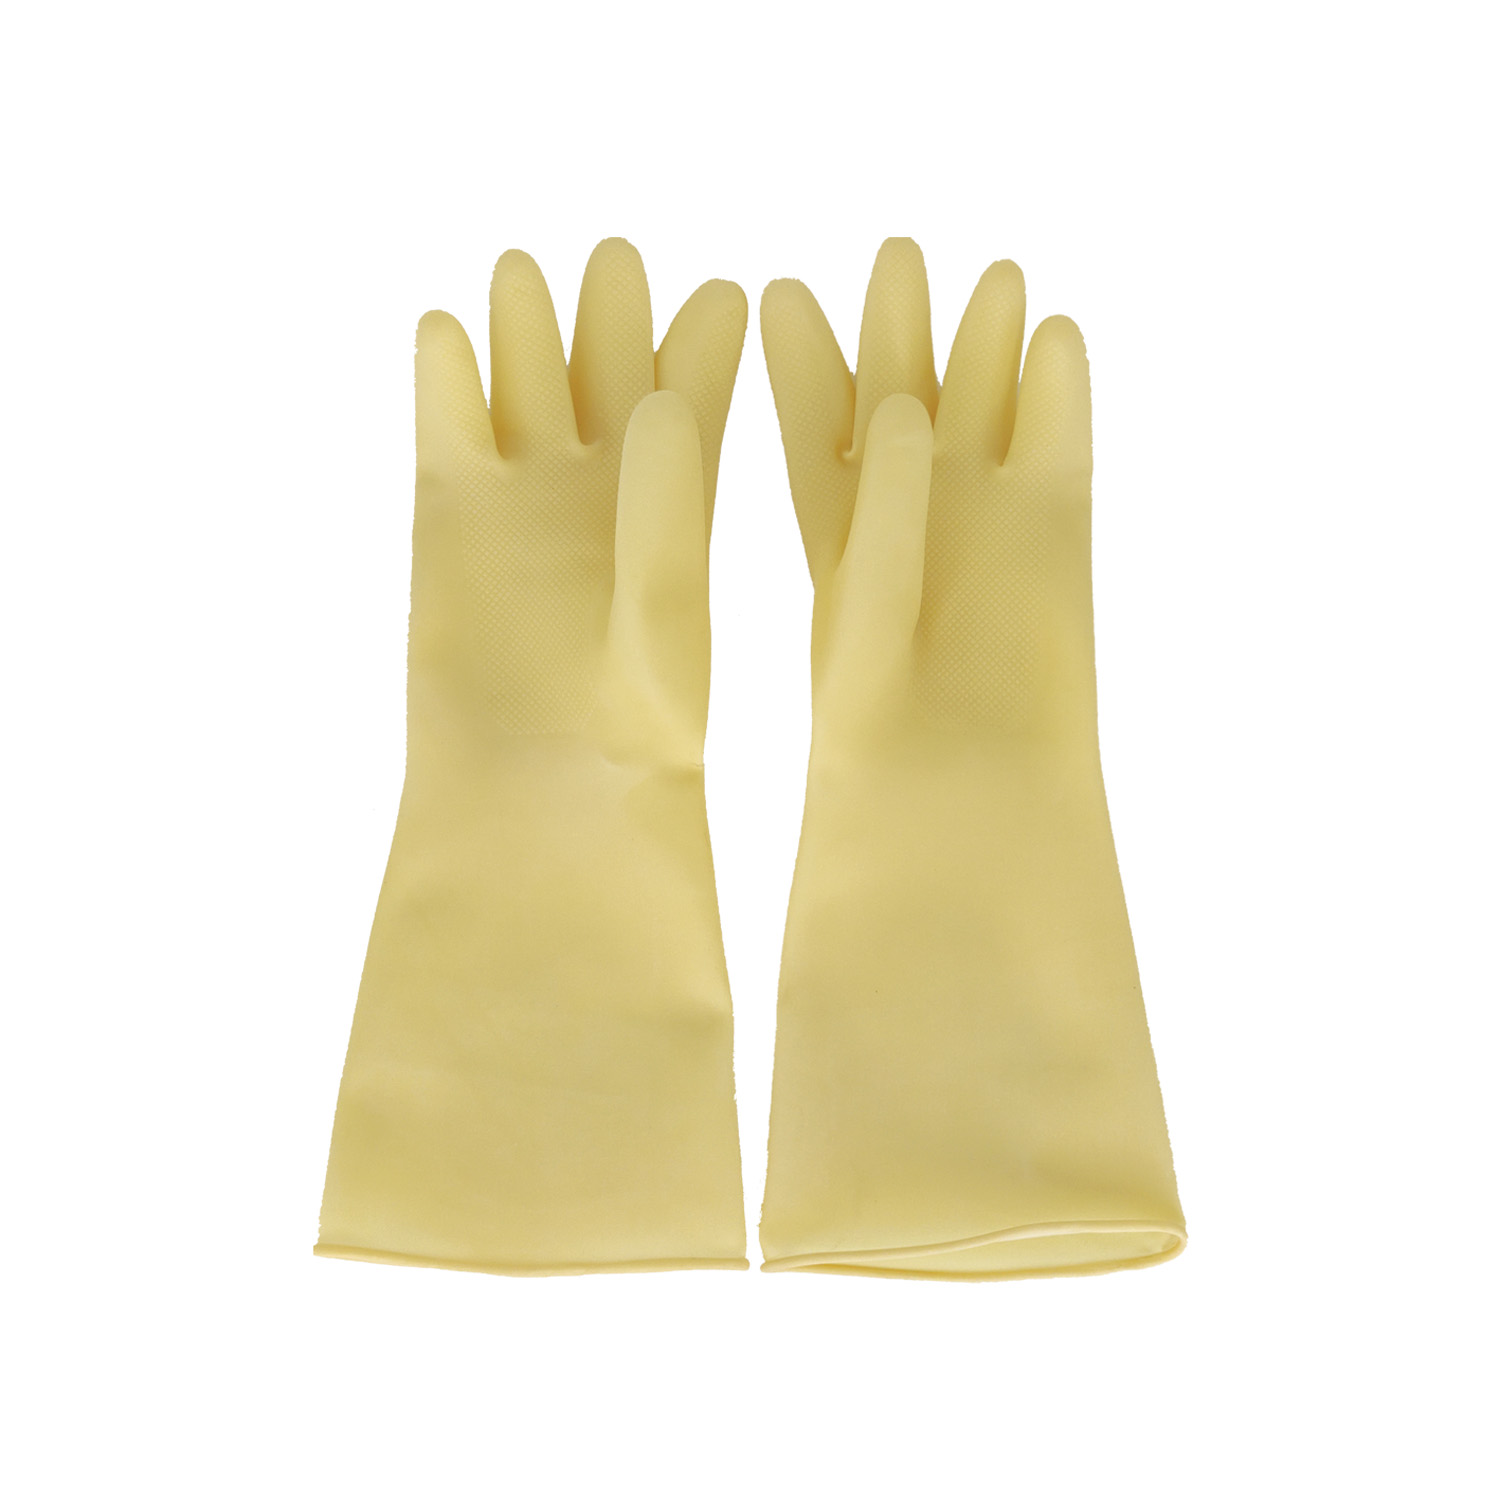 CAC China GLLX-2YS Yellow Latex Gloves, Small 